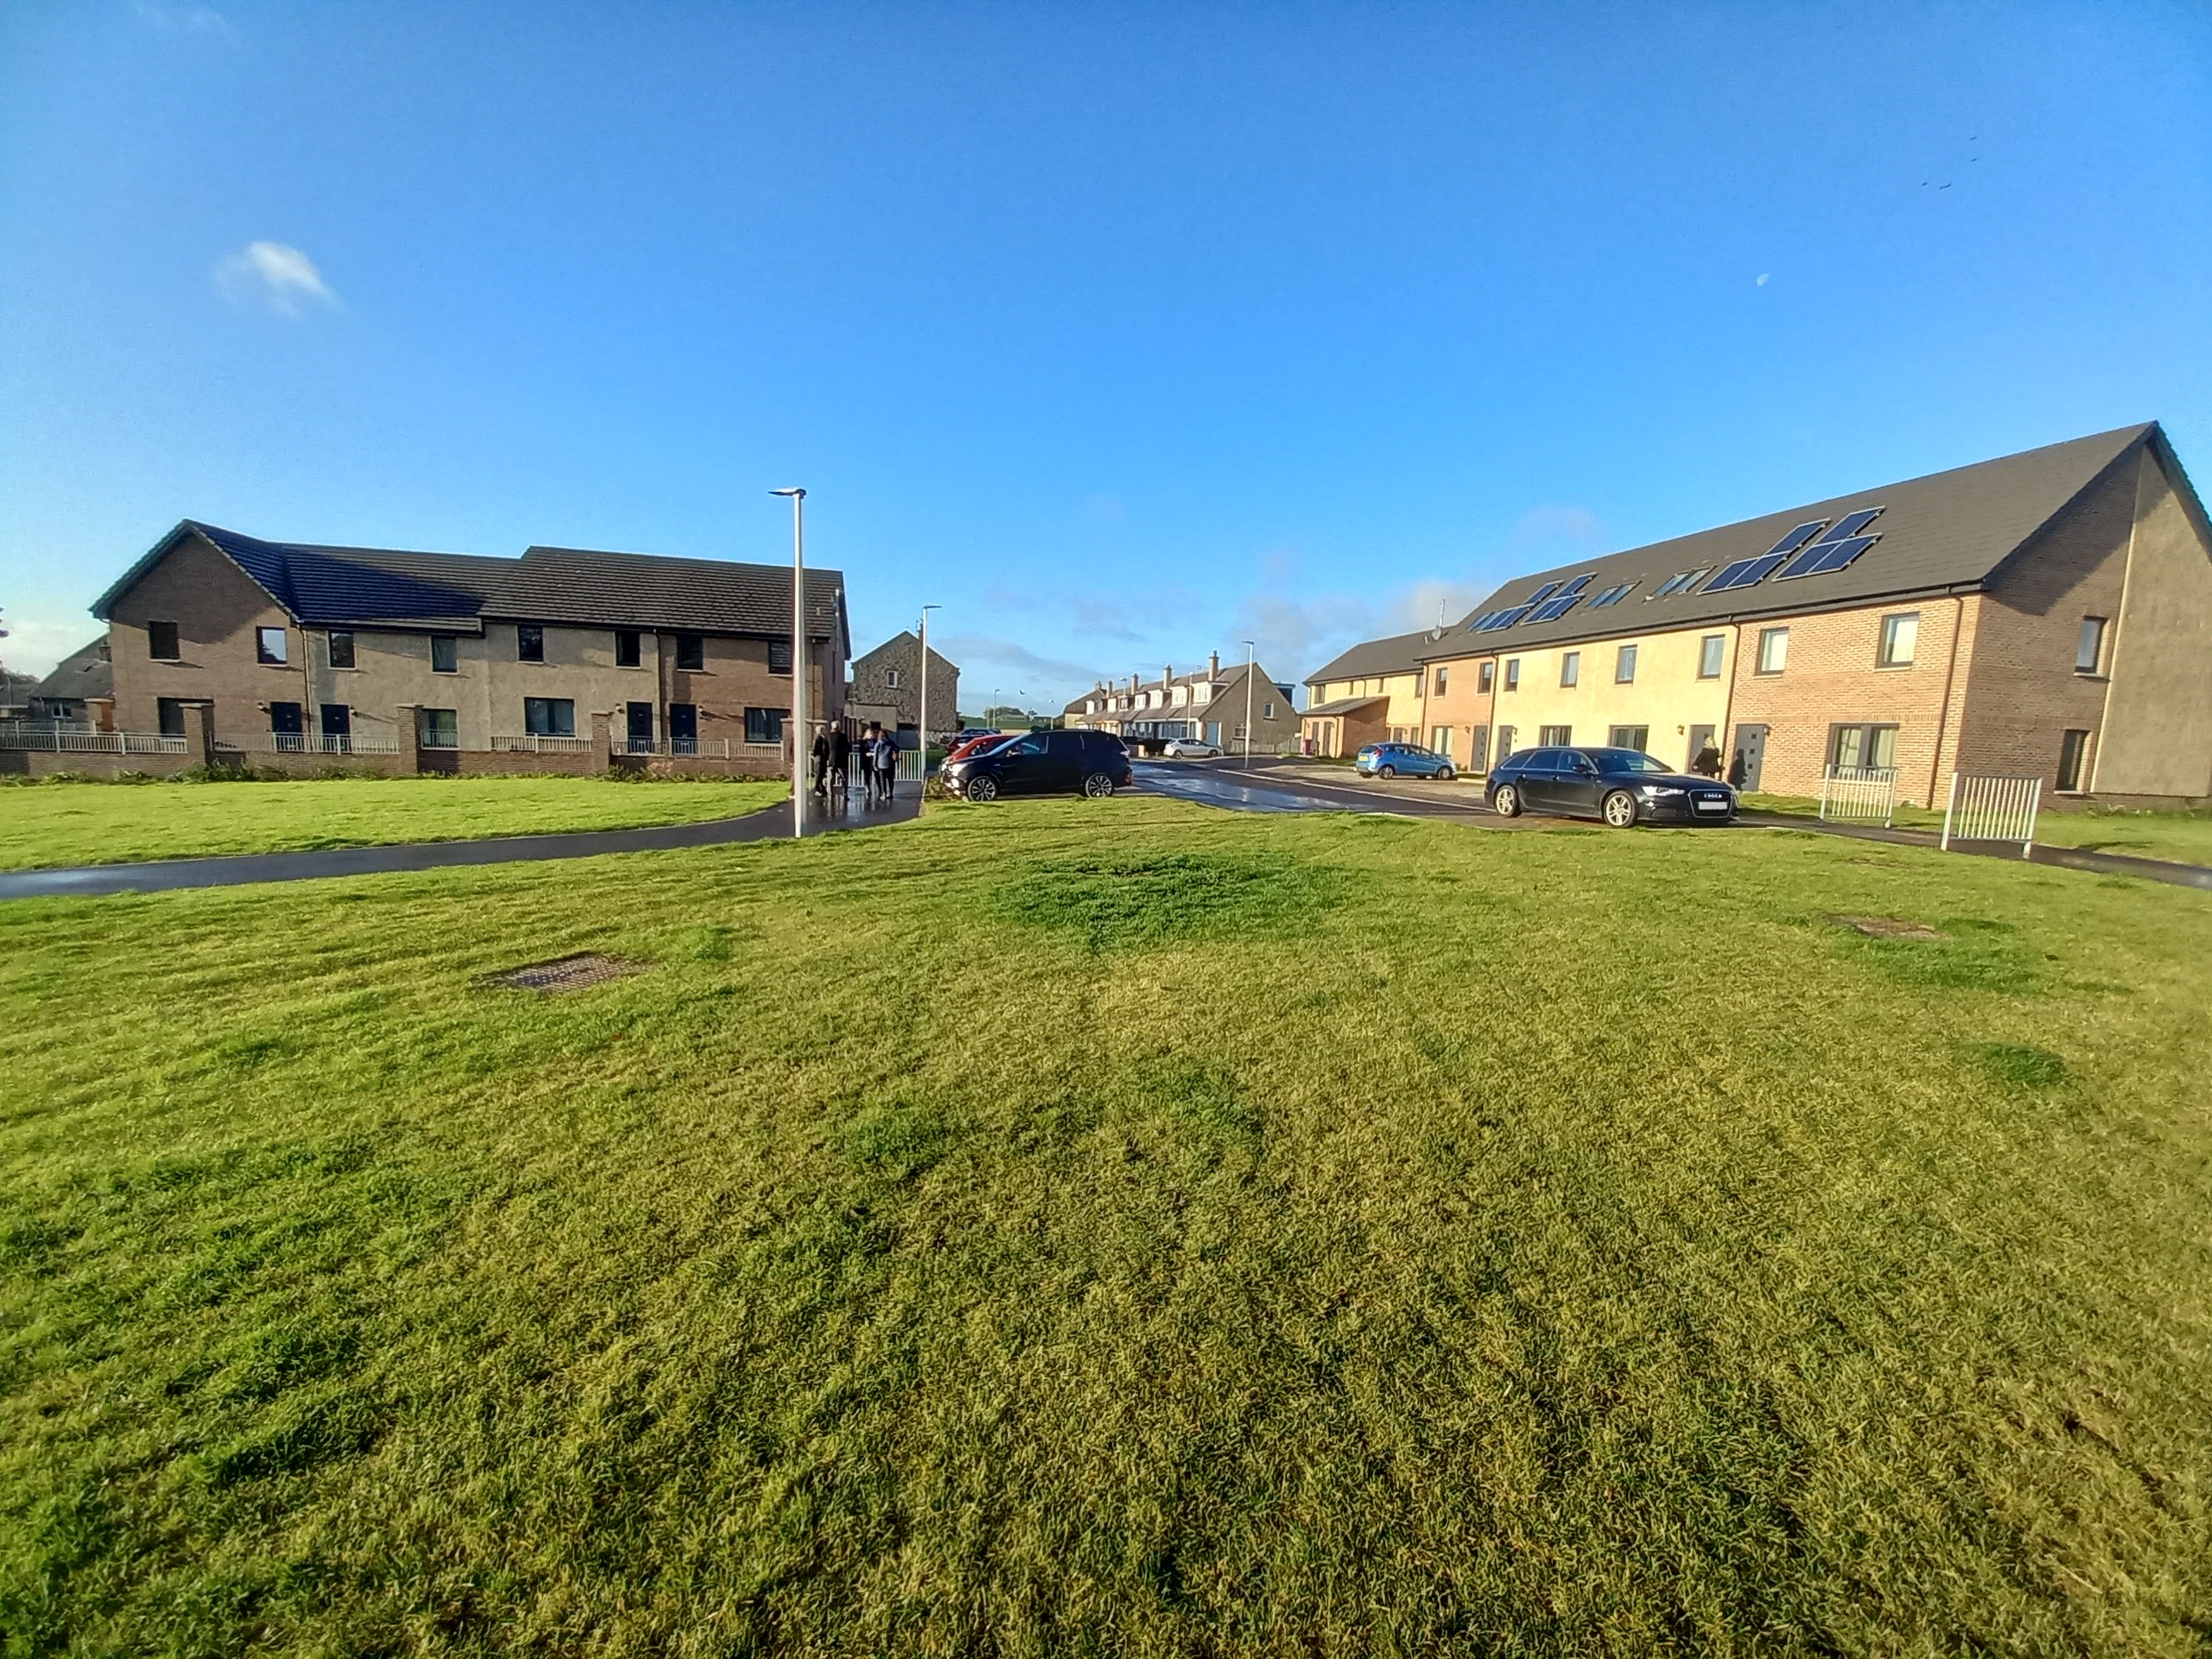 Council tenants move into new homes in Arbroath